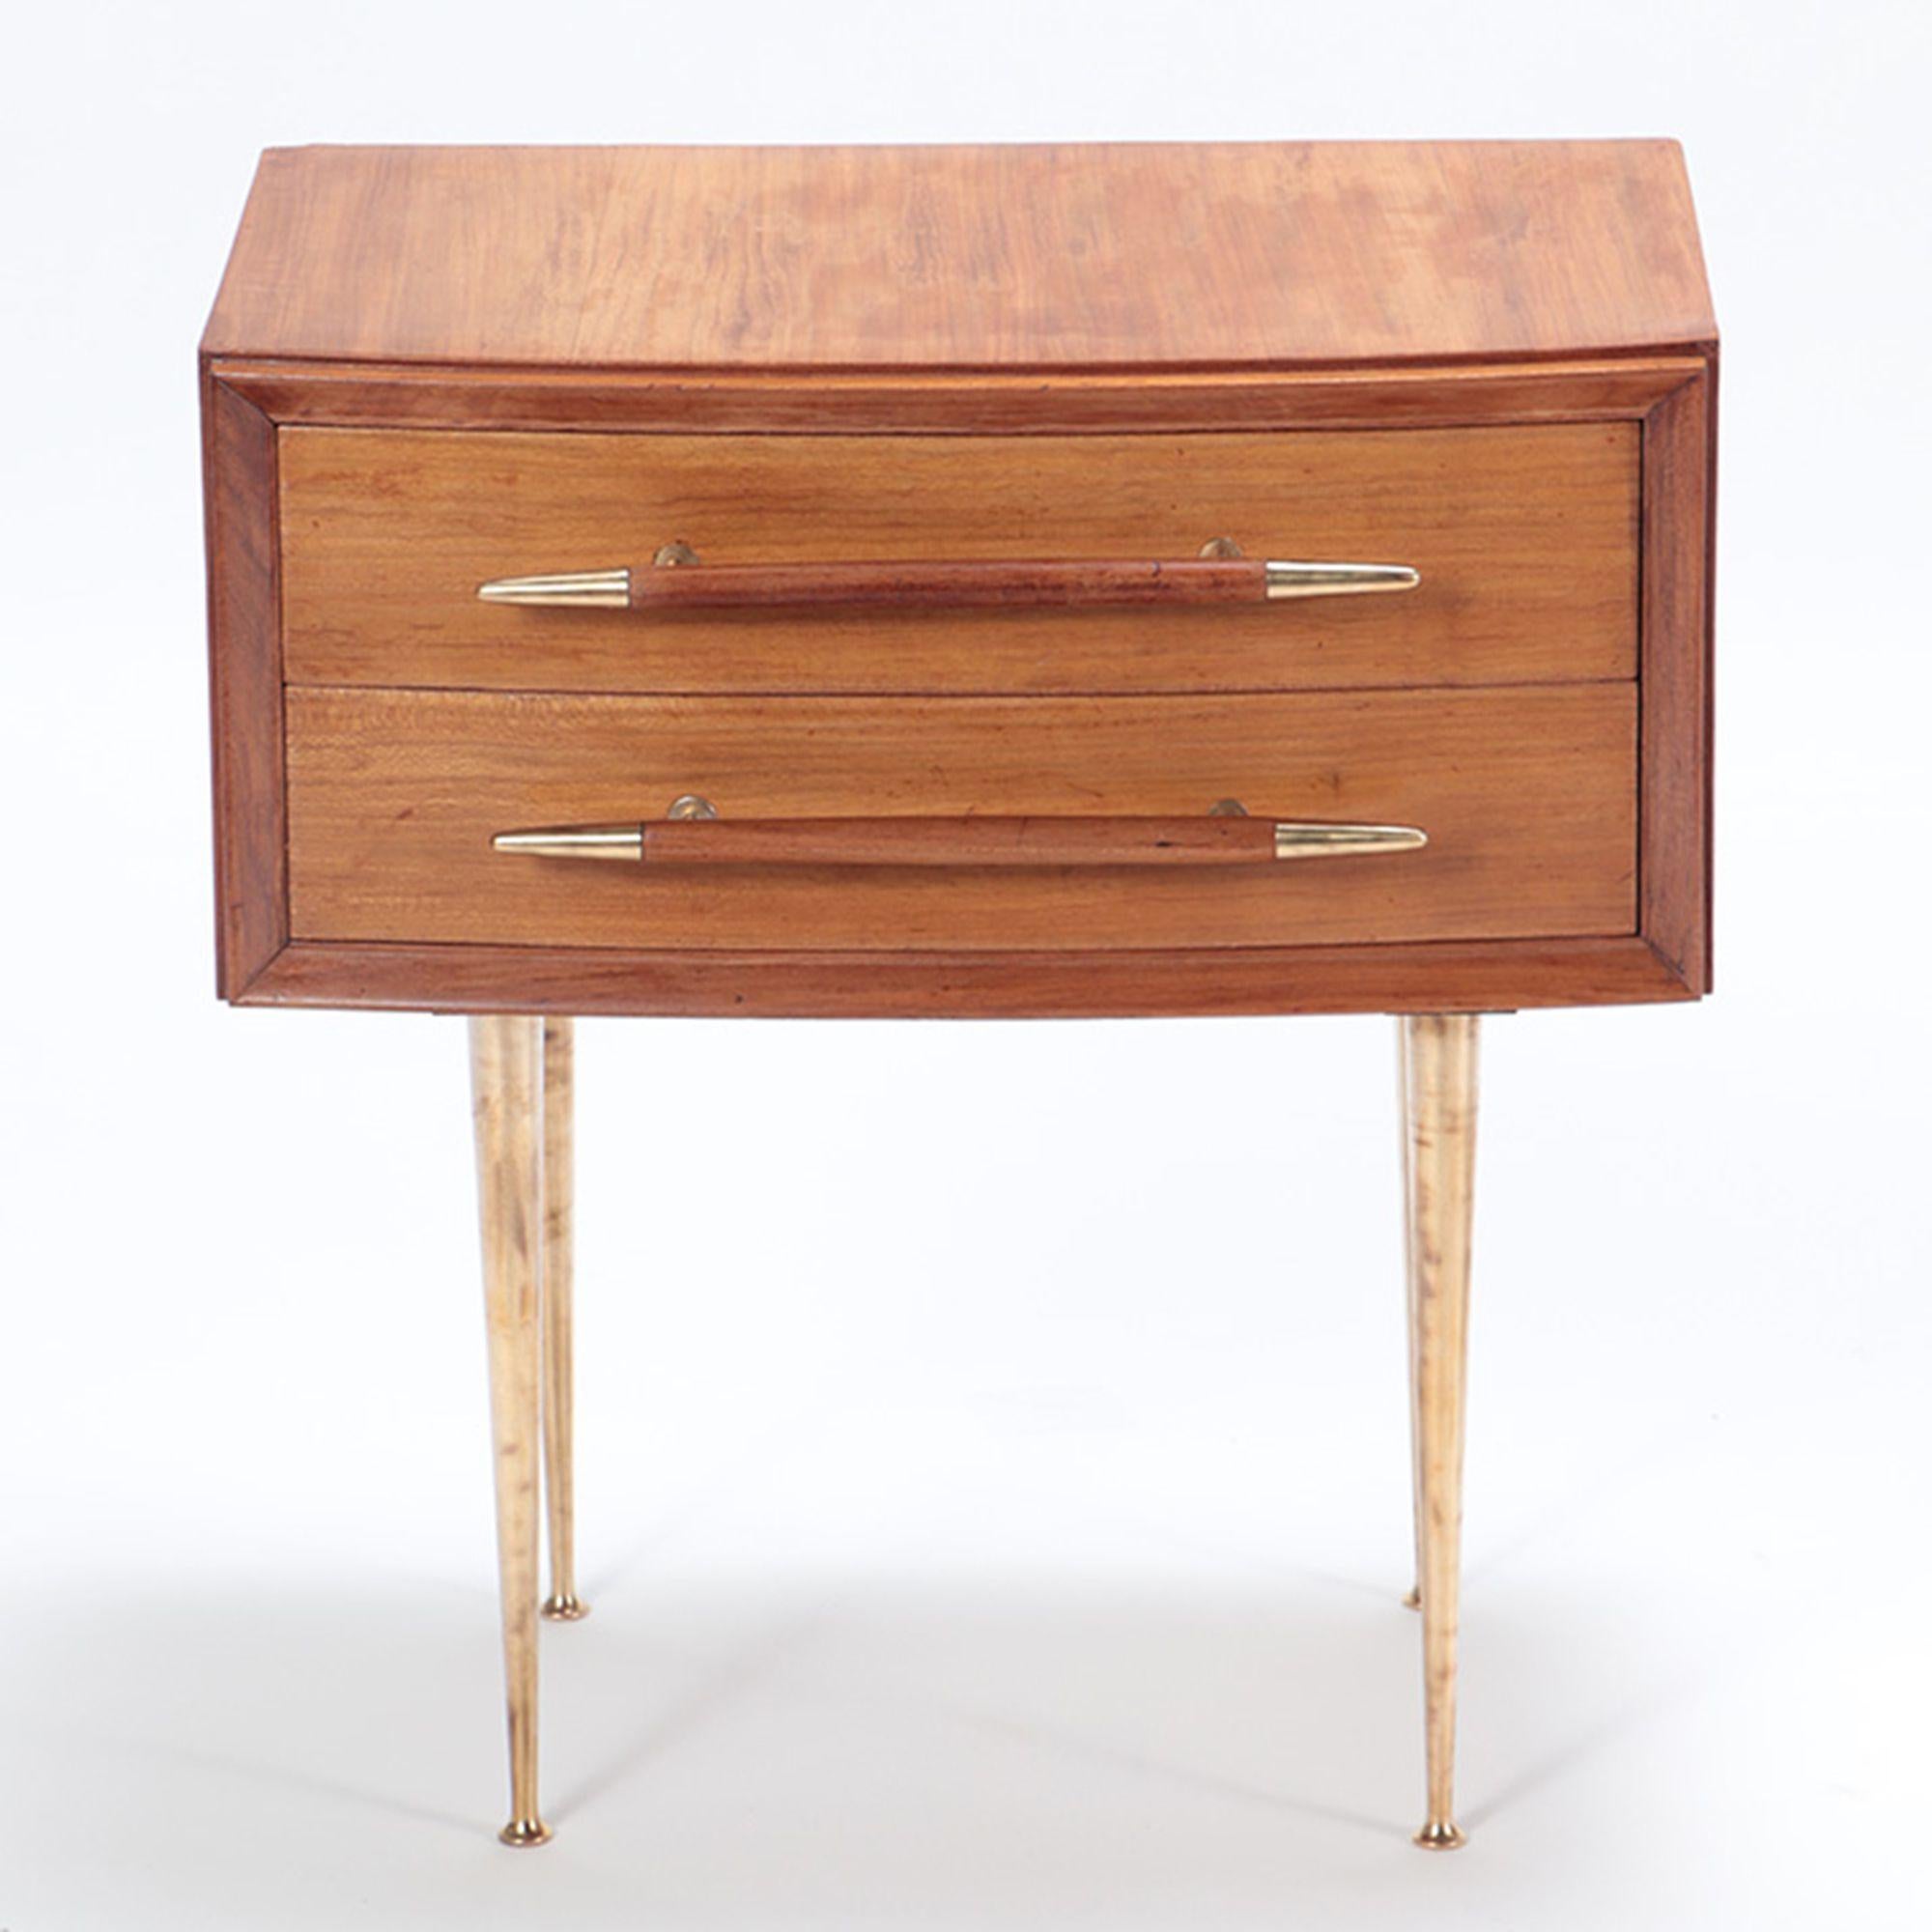 Pair of Mid-Century Modern Walnut and Brass Night Stands, circa 1955 In Good Condition For Sale In Philadelphia, PA